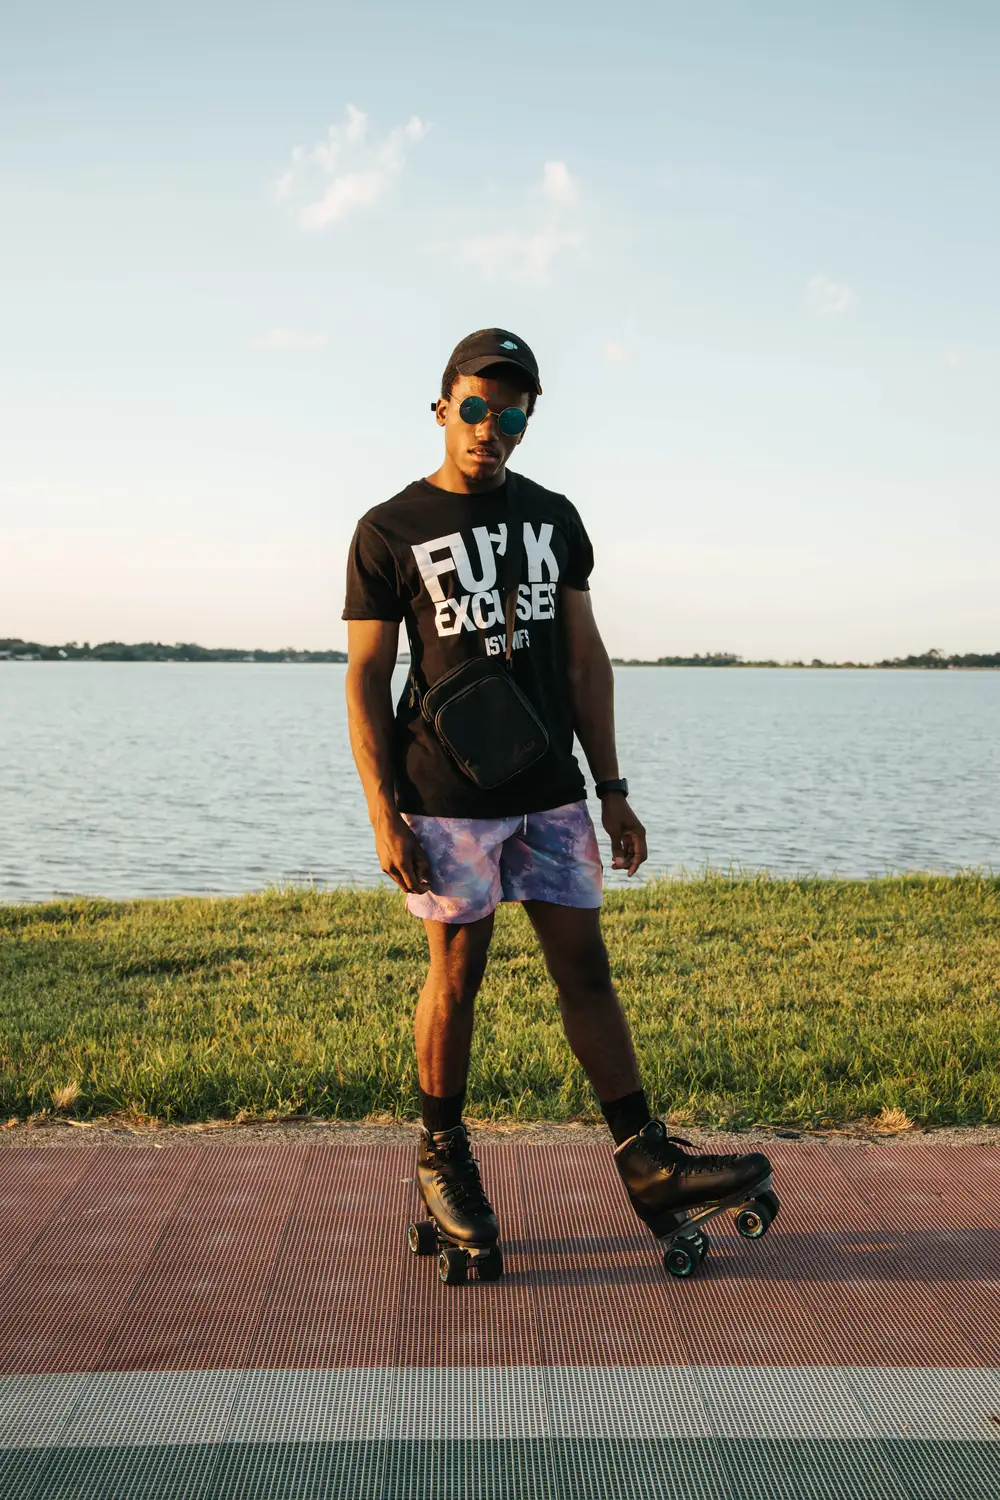 Black African wearing a black shirt and a rollerskater by a river